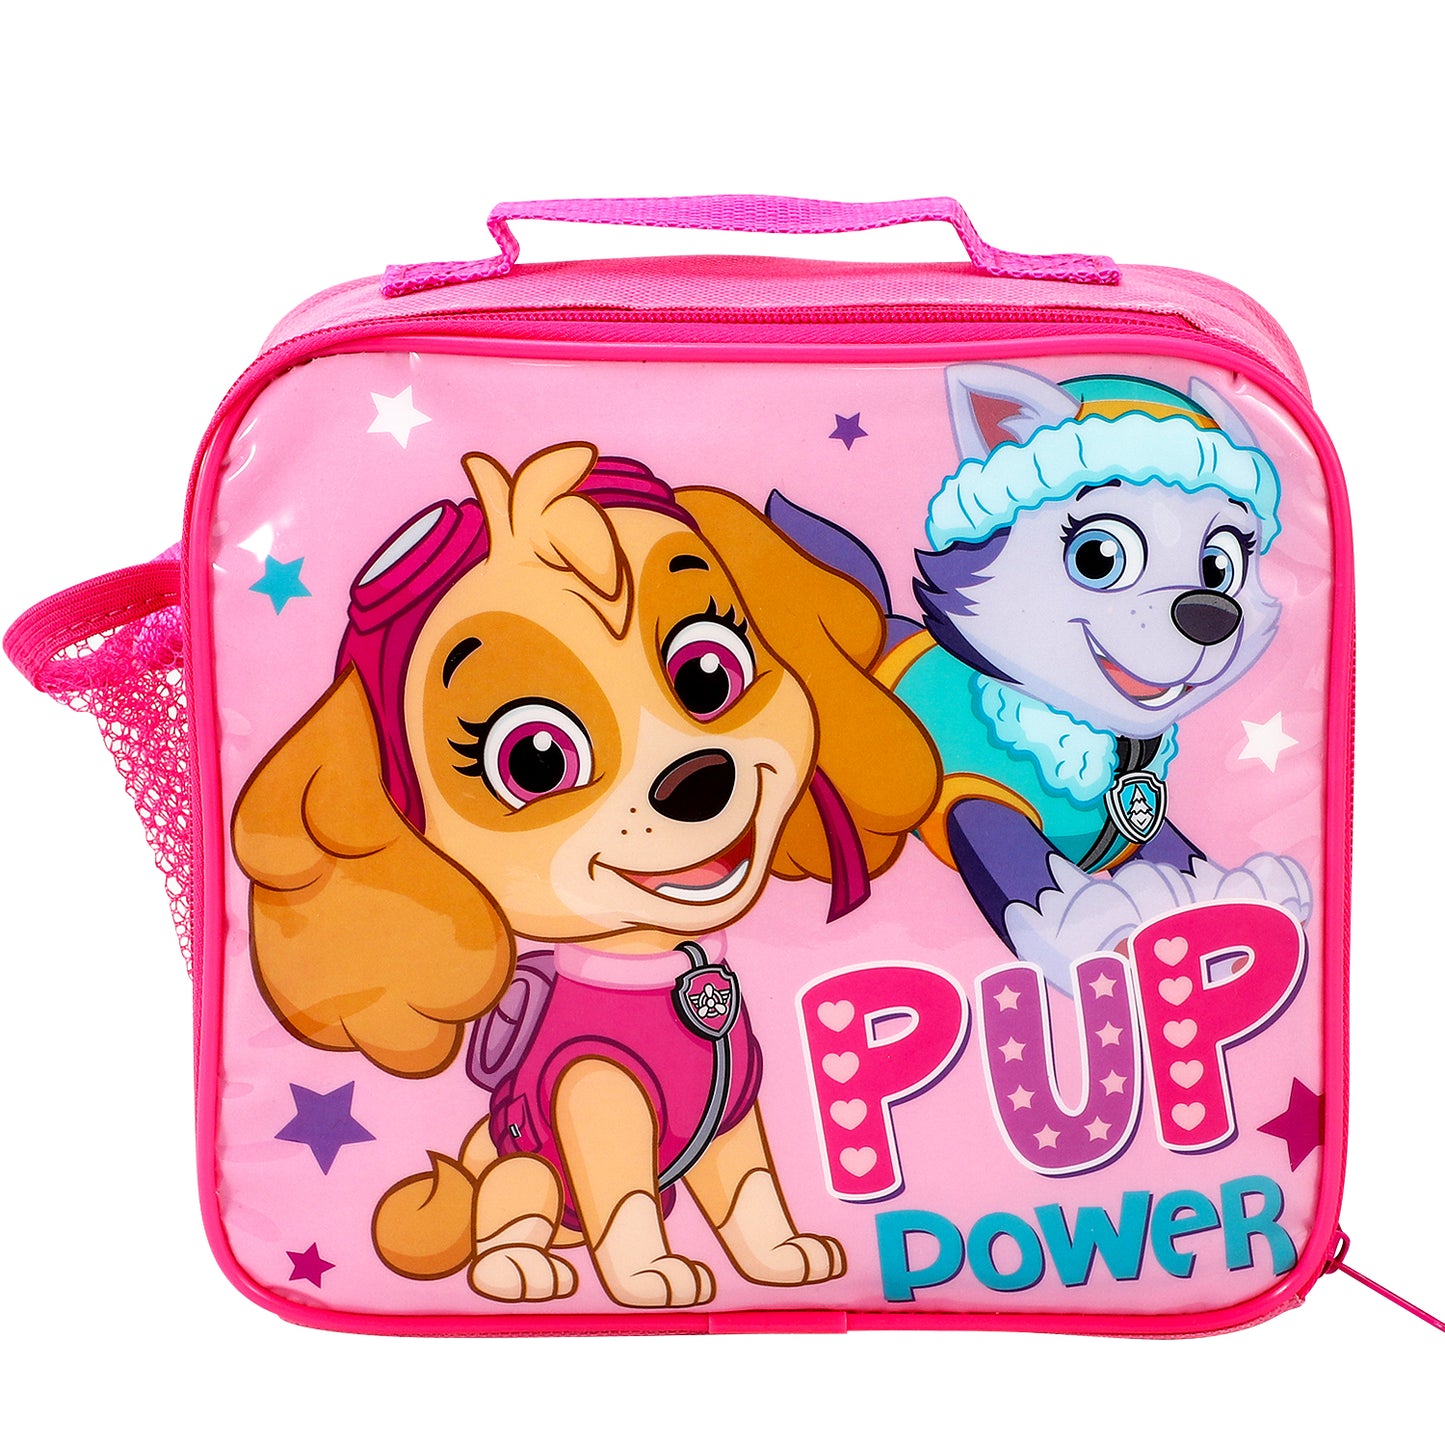 Paw Patrol Girl’s Pink Insulated Lunch Bag